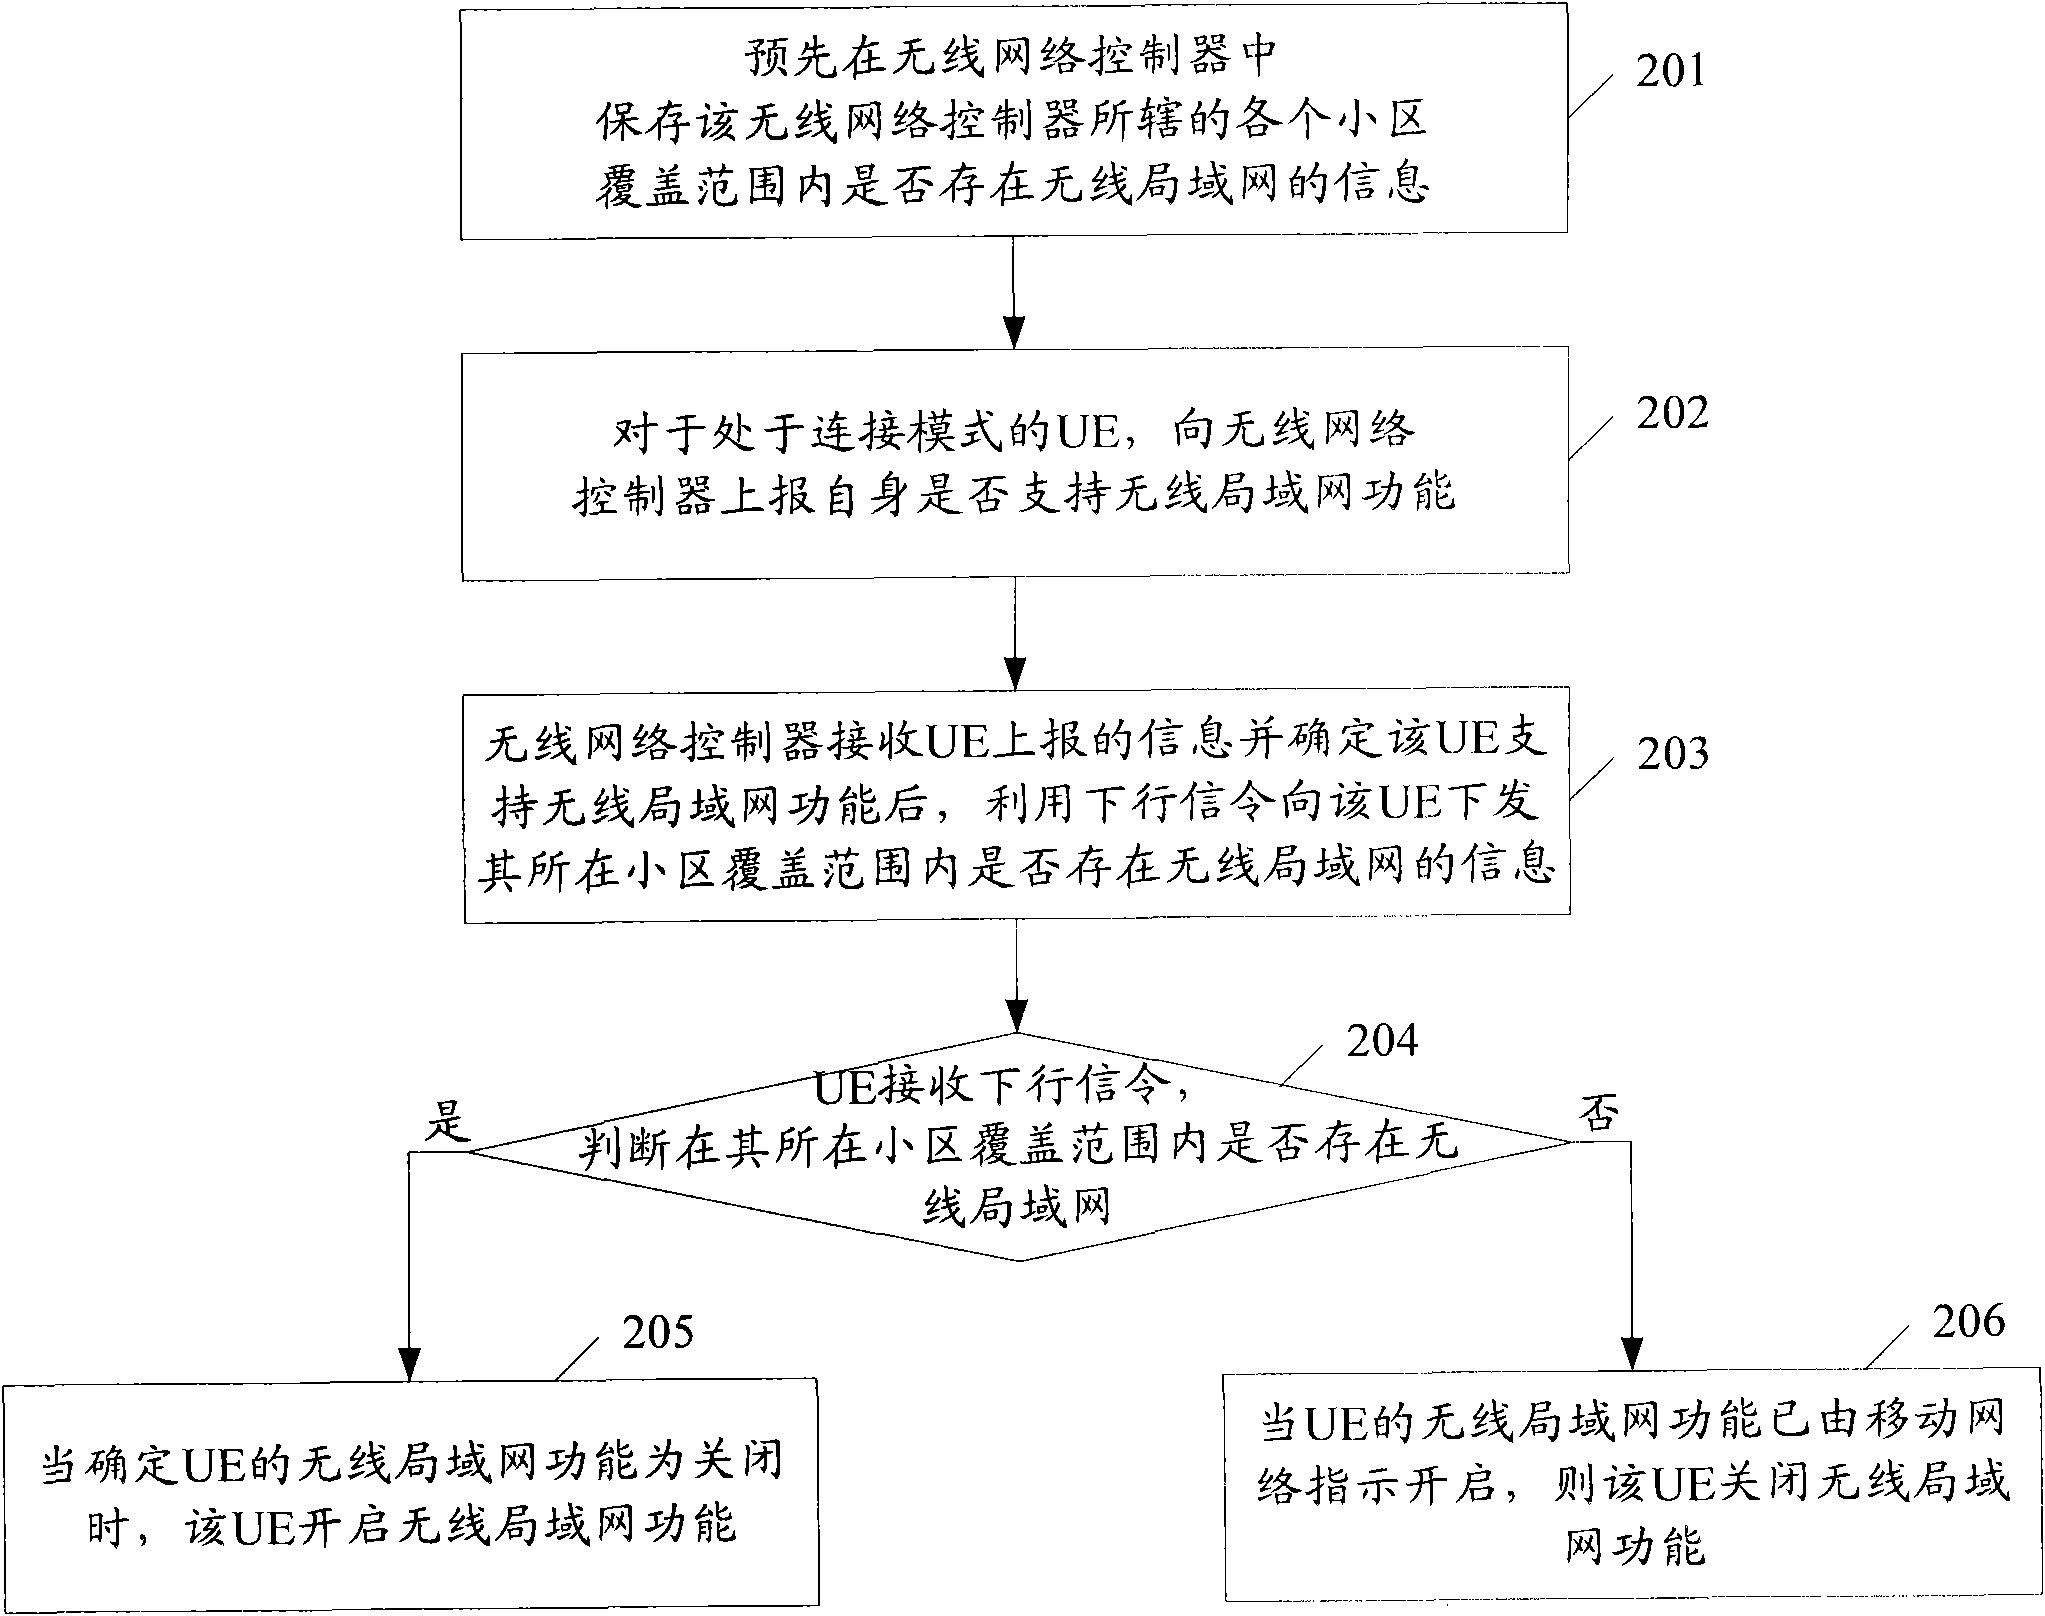 Method for finding radio local area network in mobile network